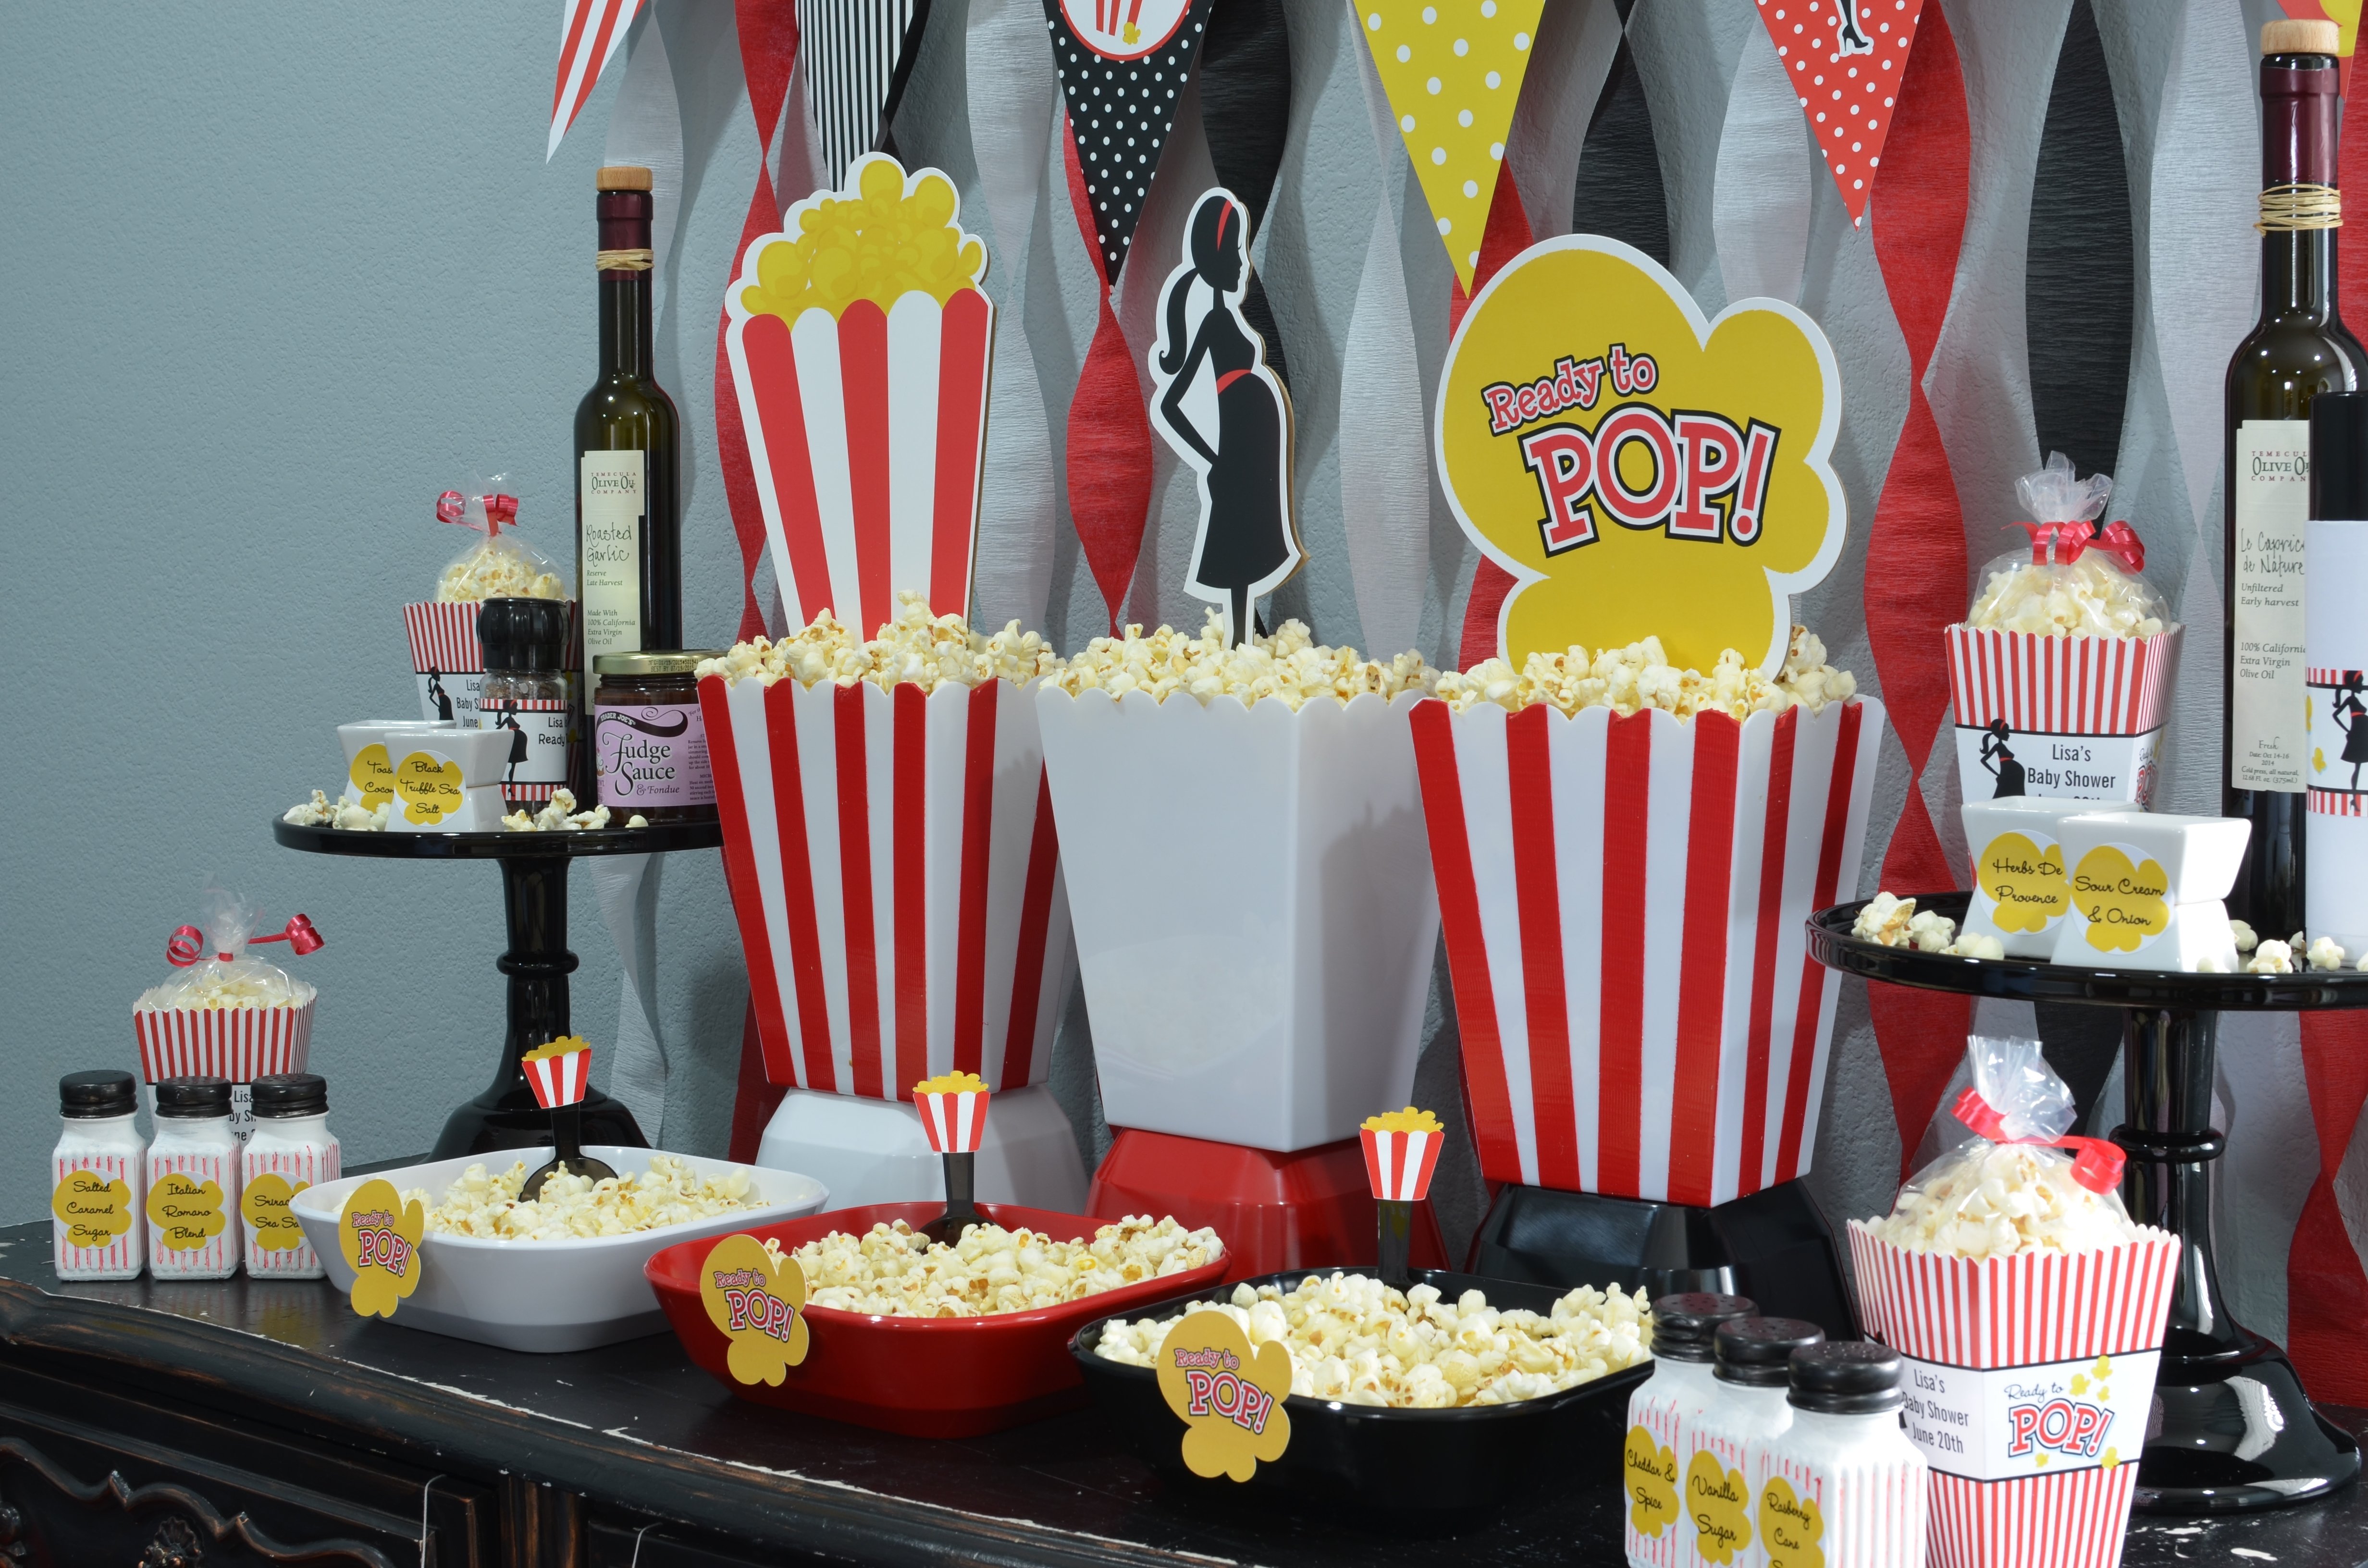 10 Attractive About To Pop Baby Shower Ideas ready to pop baby shower candles and favors 2022